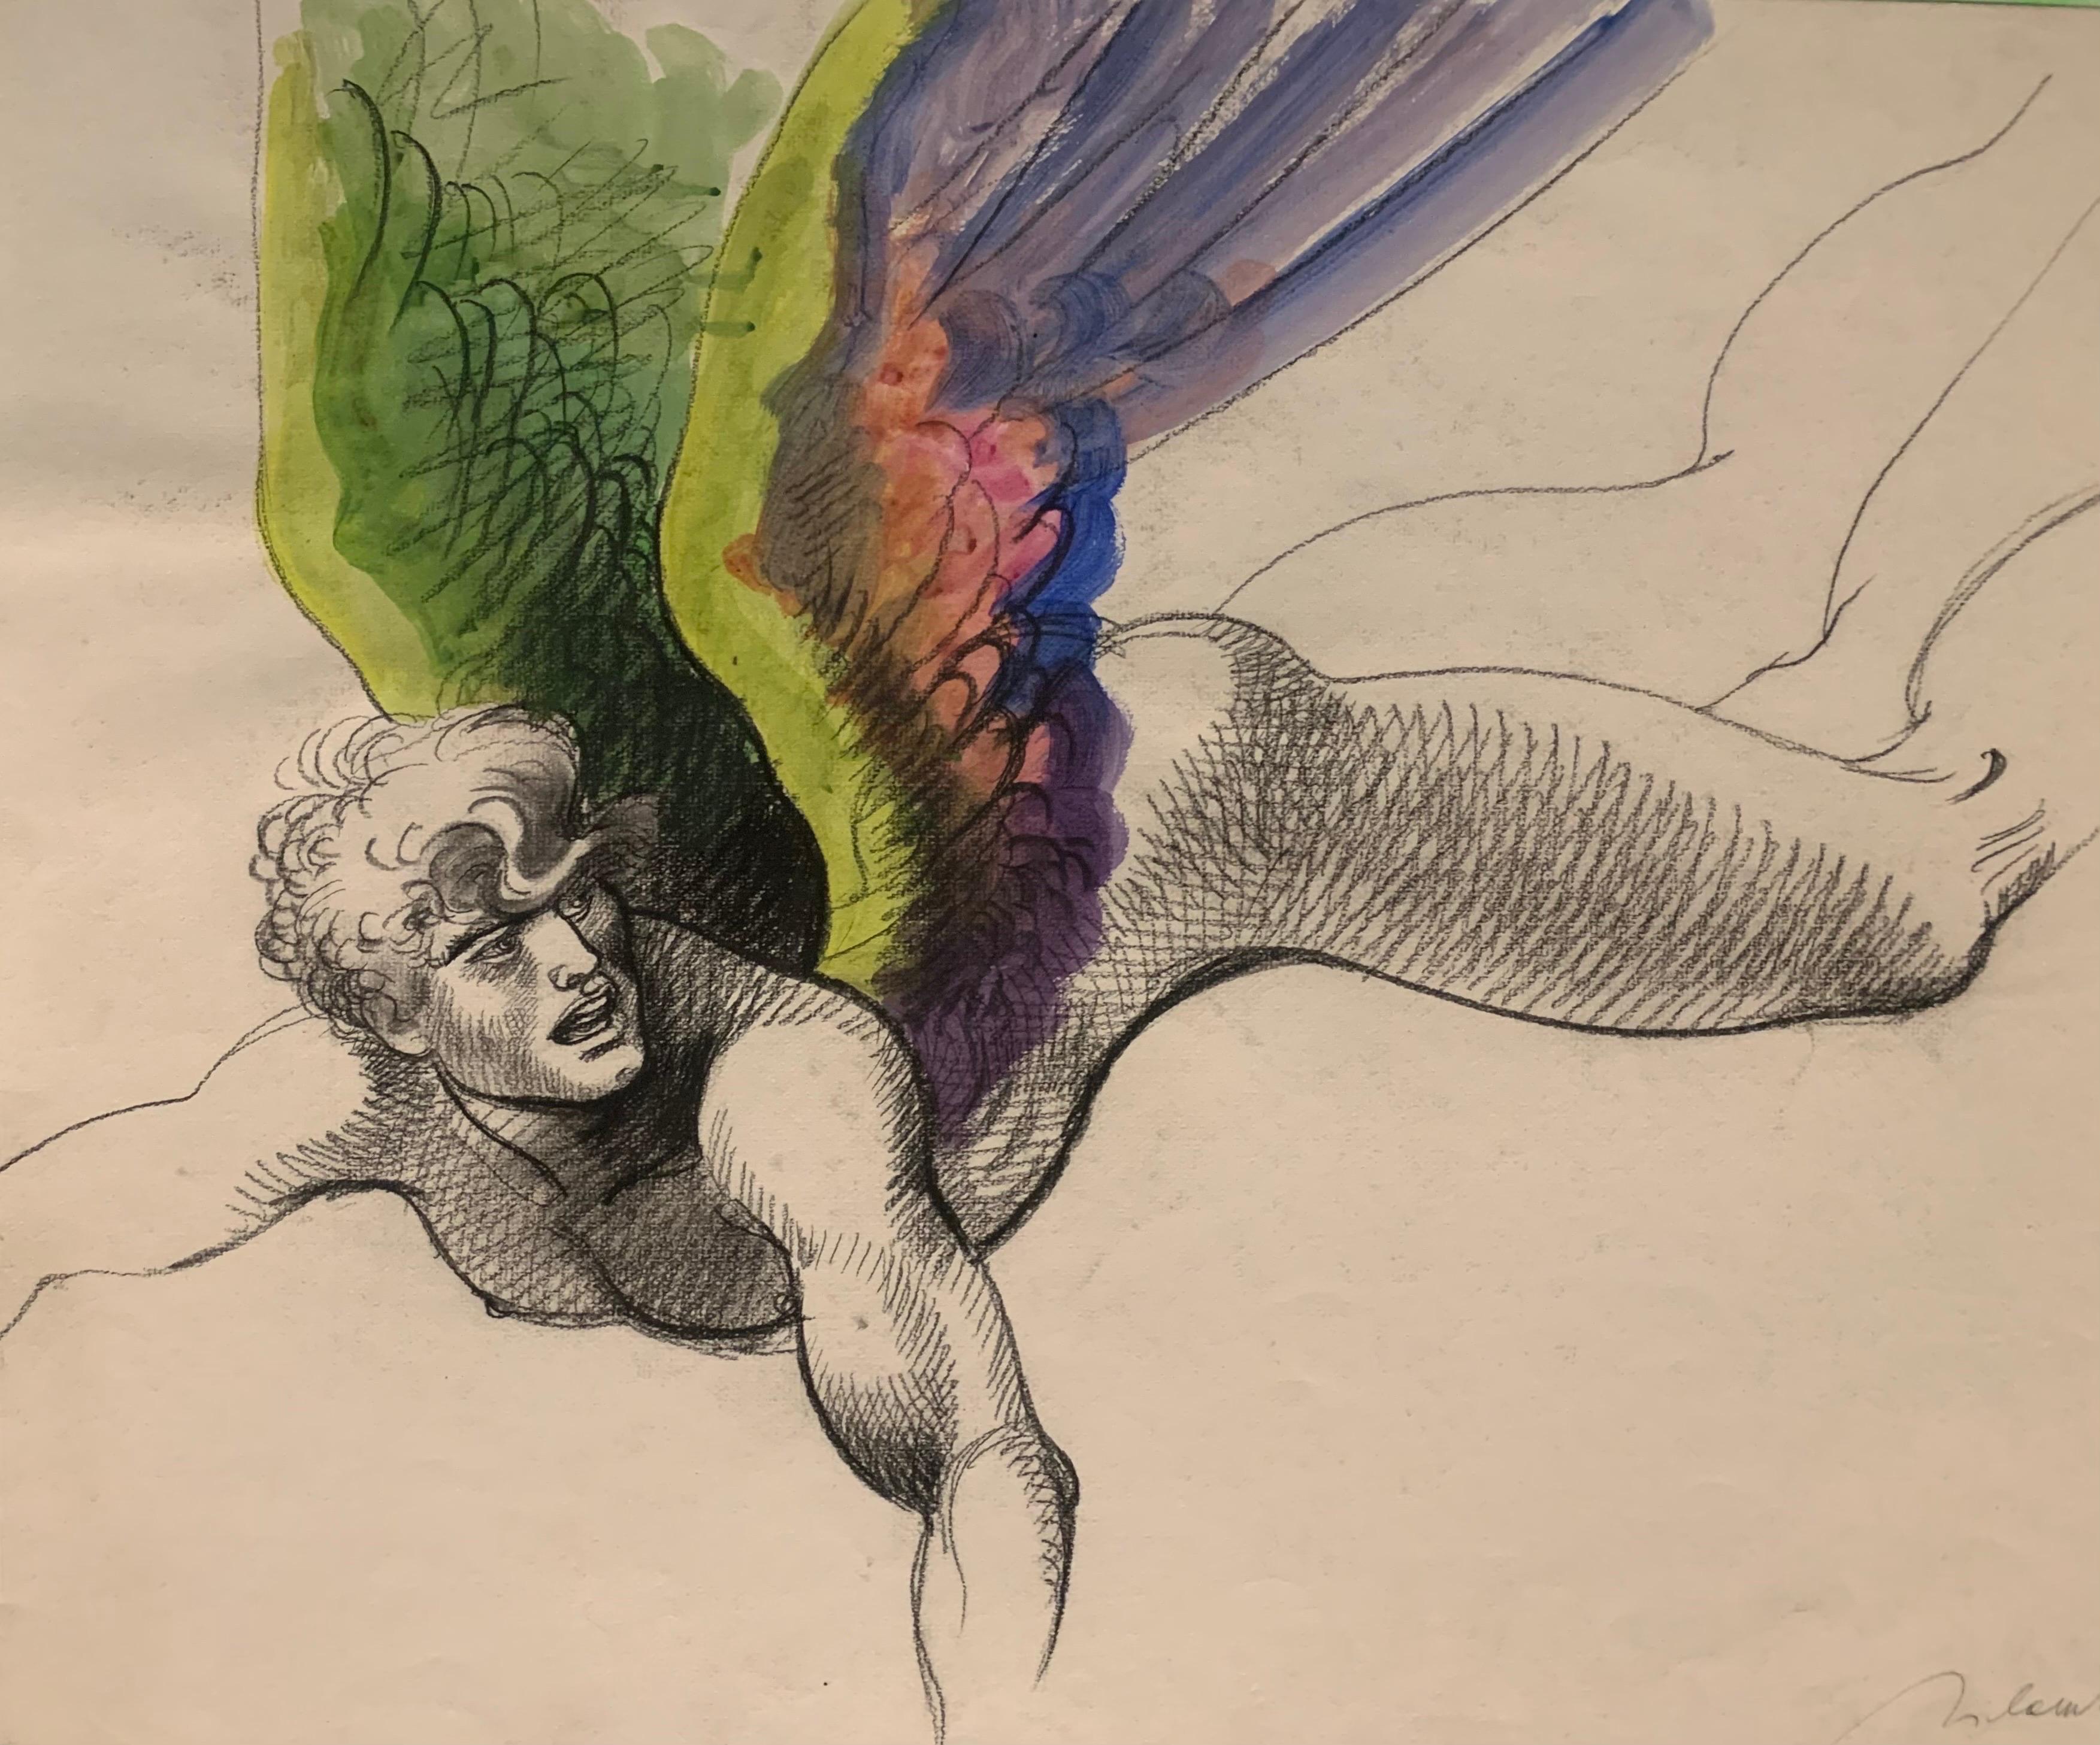 Rainbow Angel. Sketches From The Angelesque Series By Marco Silombria. Year 1986 - Pop Art Art by Marco Silombria 